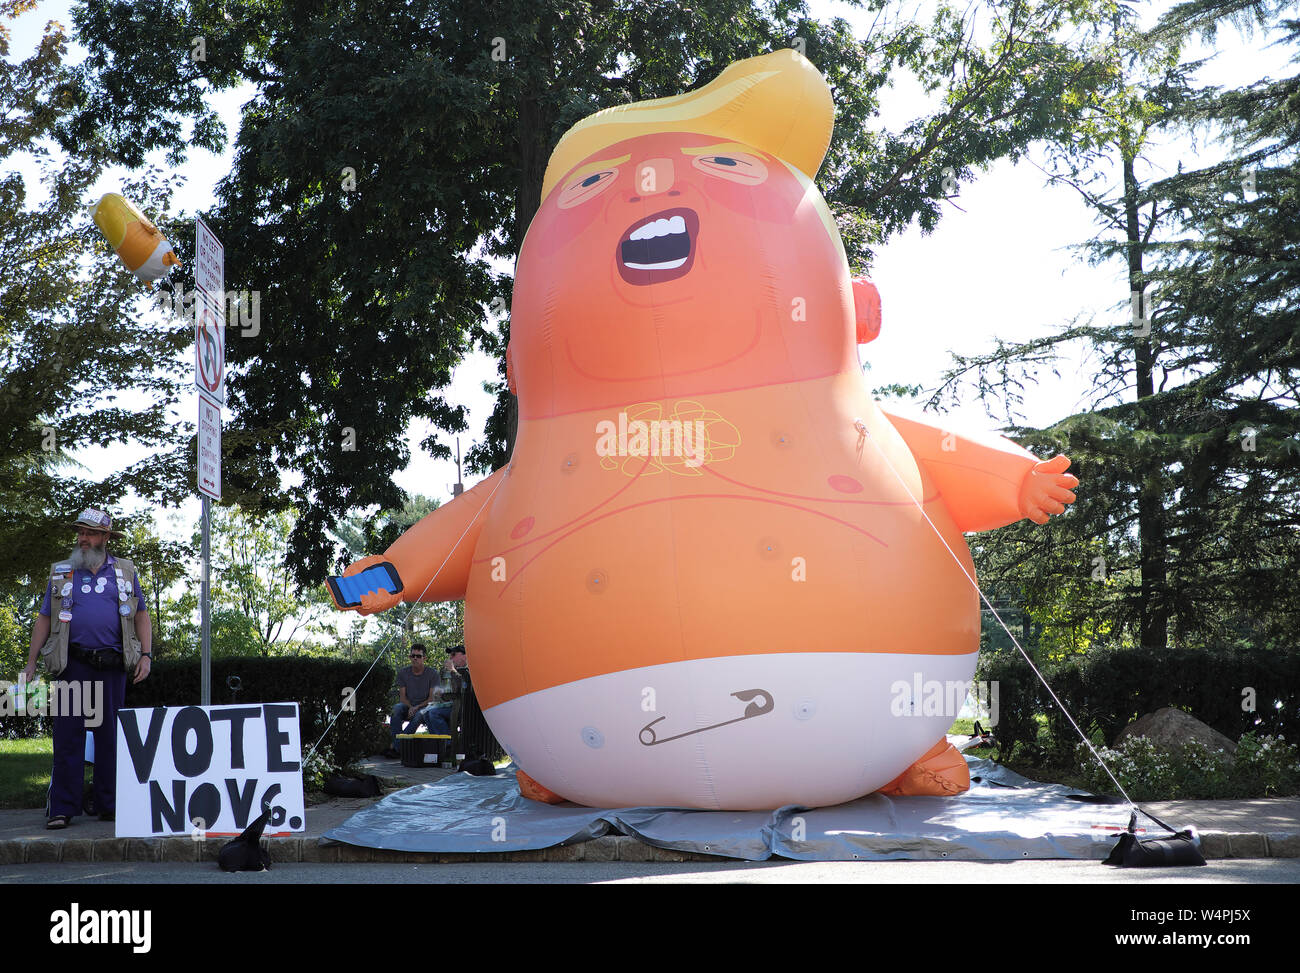 Members of the public view a Donald Trump baby balloon on display during a  street fair in Maplewood, New Jersey Stock Photo - Alamy